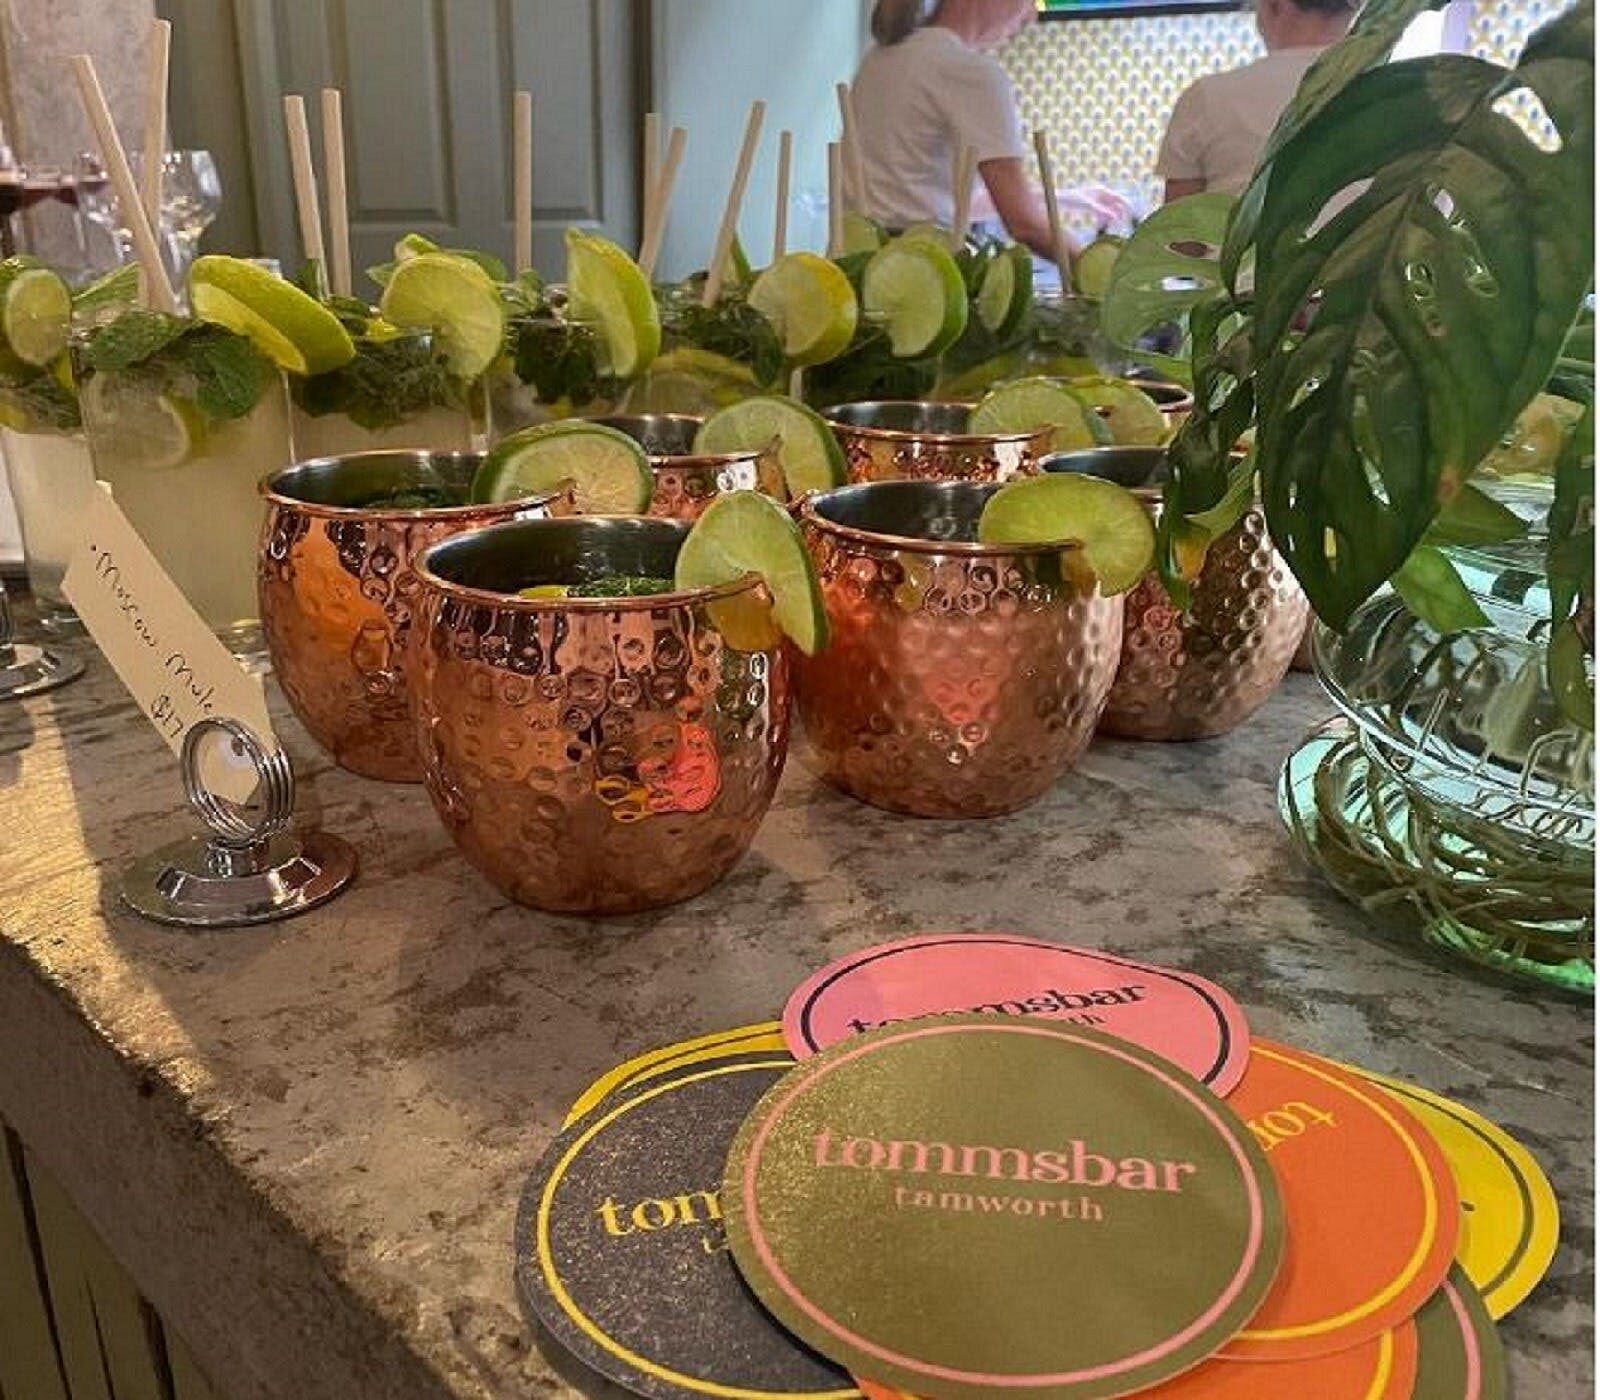 Photo of one of Tommsbar cocktails called Moscow mule ready to be served